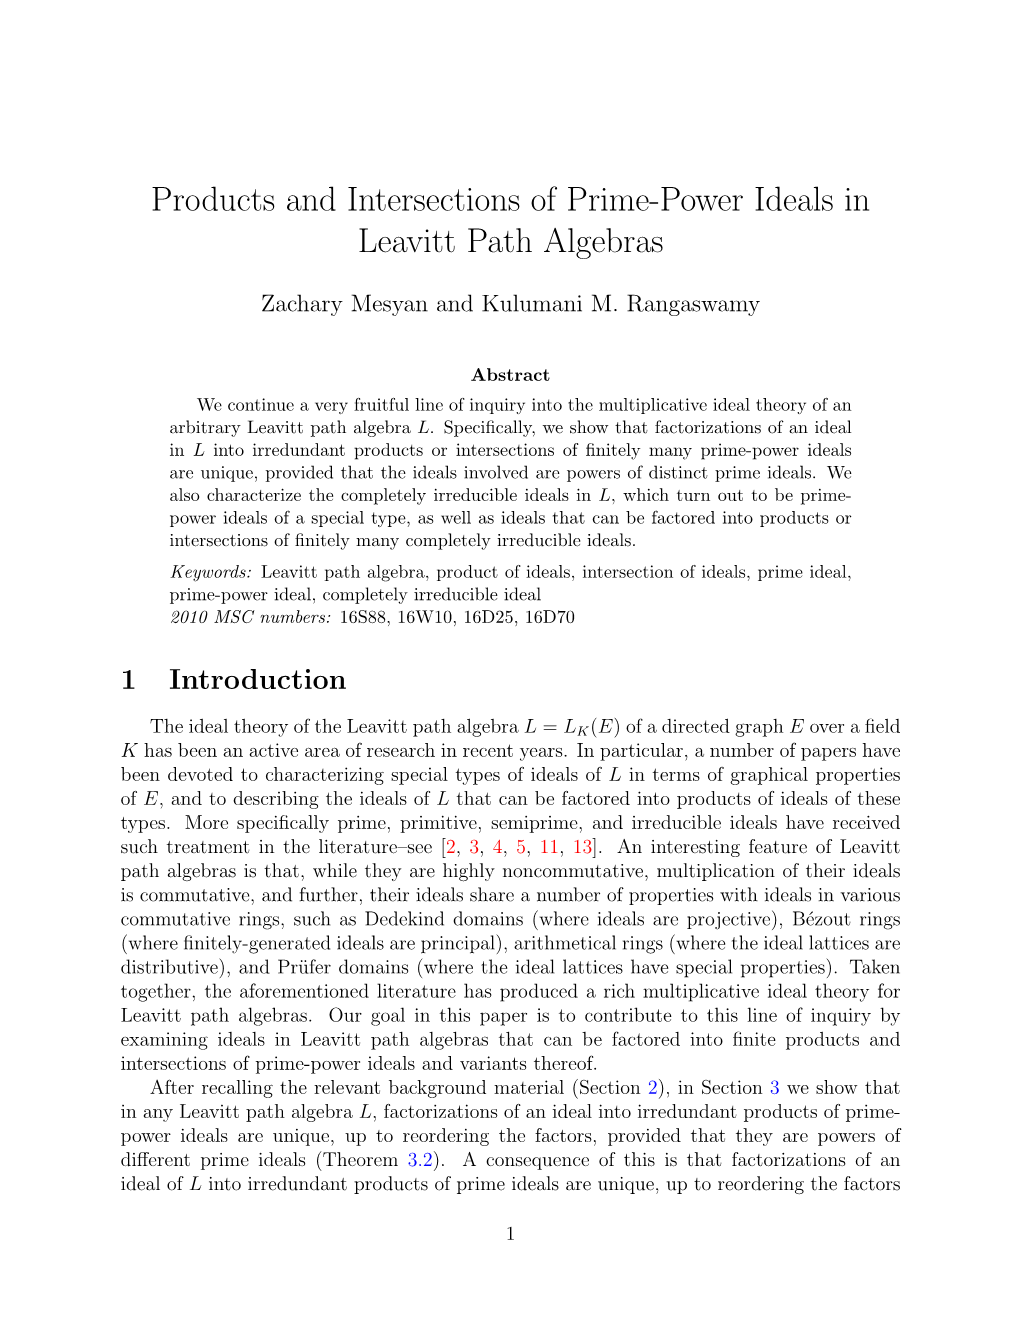 Products and Intersections of Prime-Power Ideals in Leavitt Path Algebras